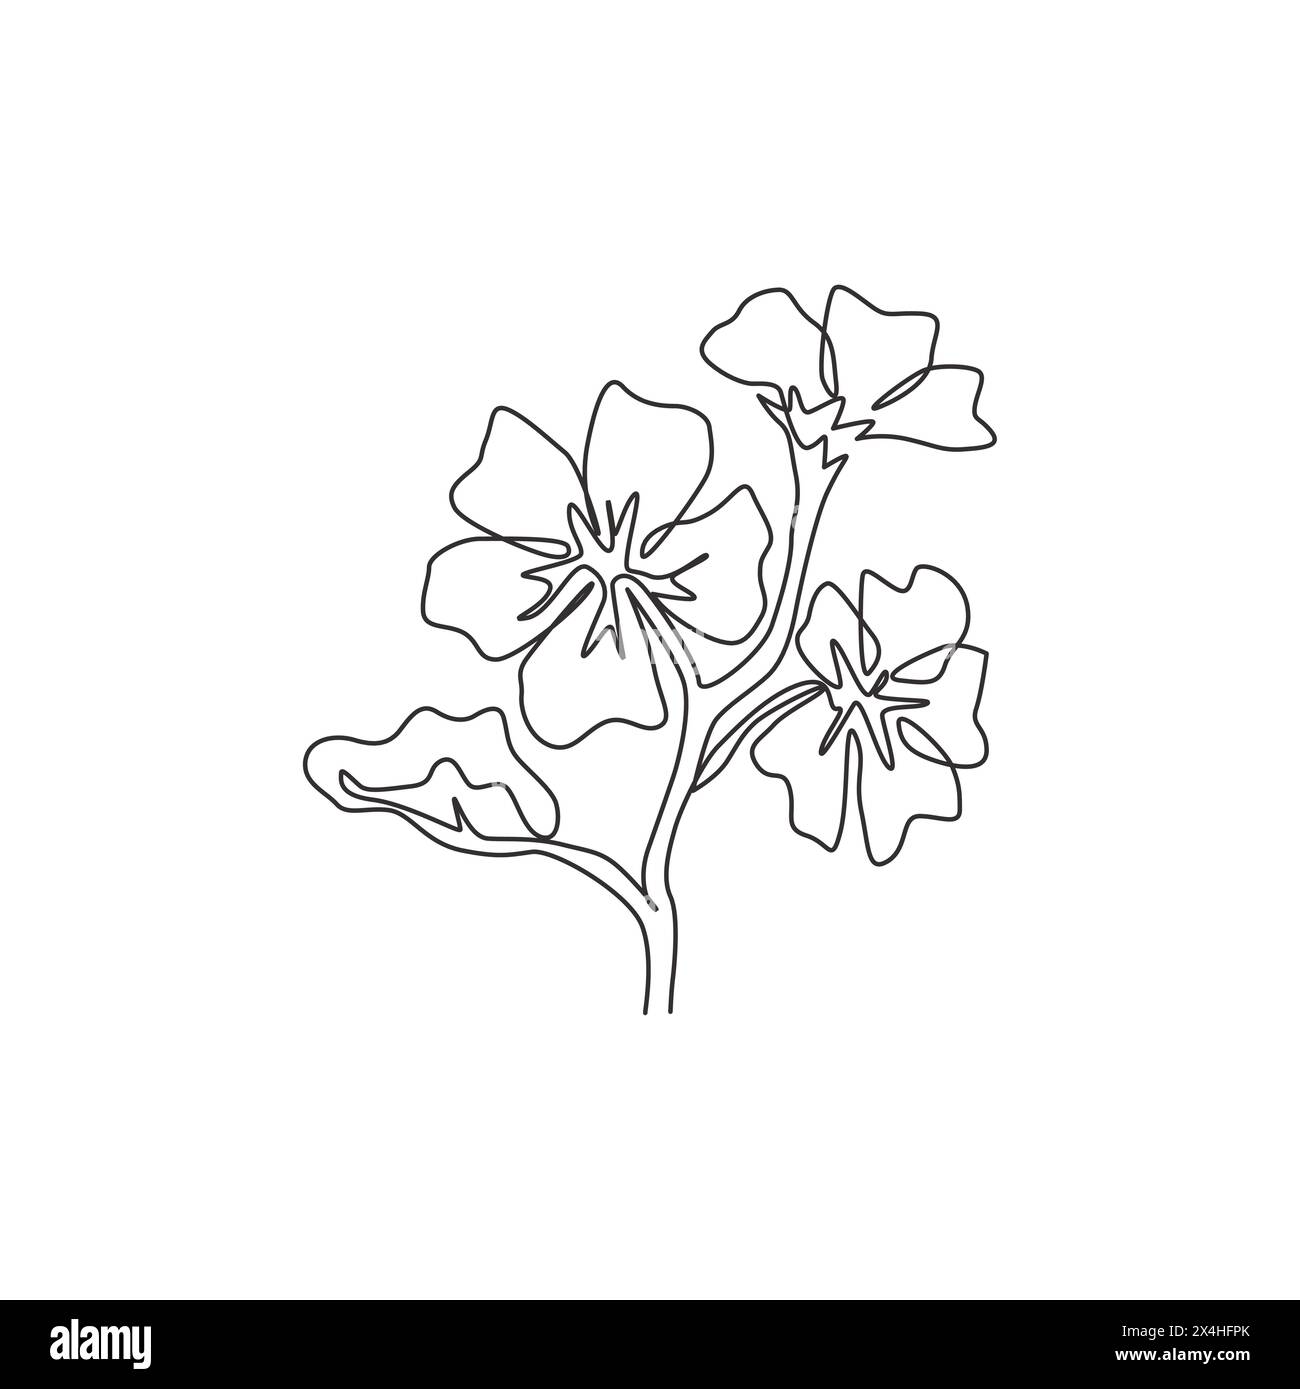 Single continuous line drawing beauty fresh purple mallow for home decor wall art poster. decorative malvasylvestris flower concept for greeting card Stock Vector